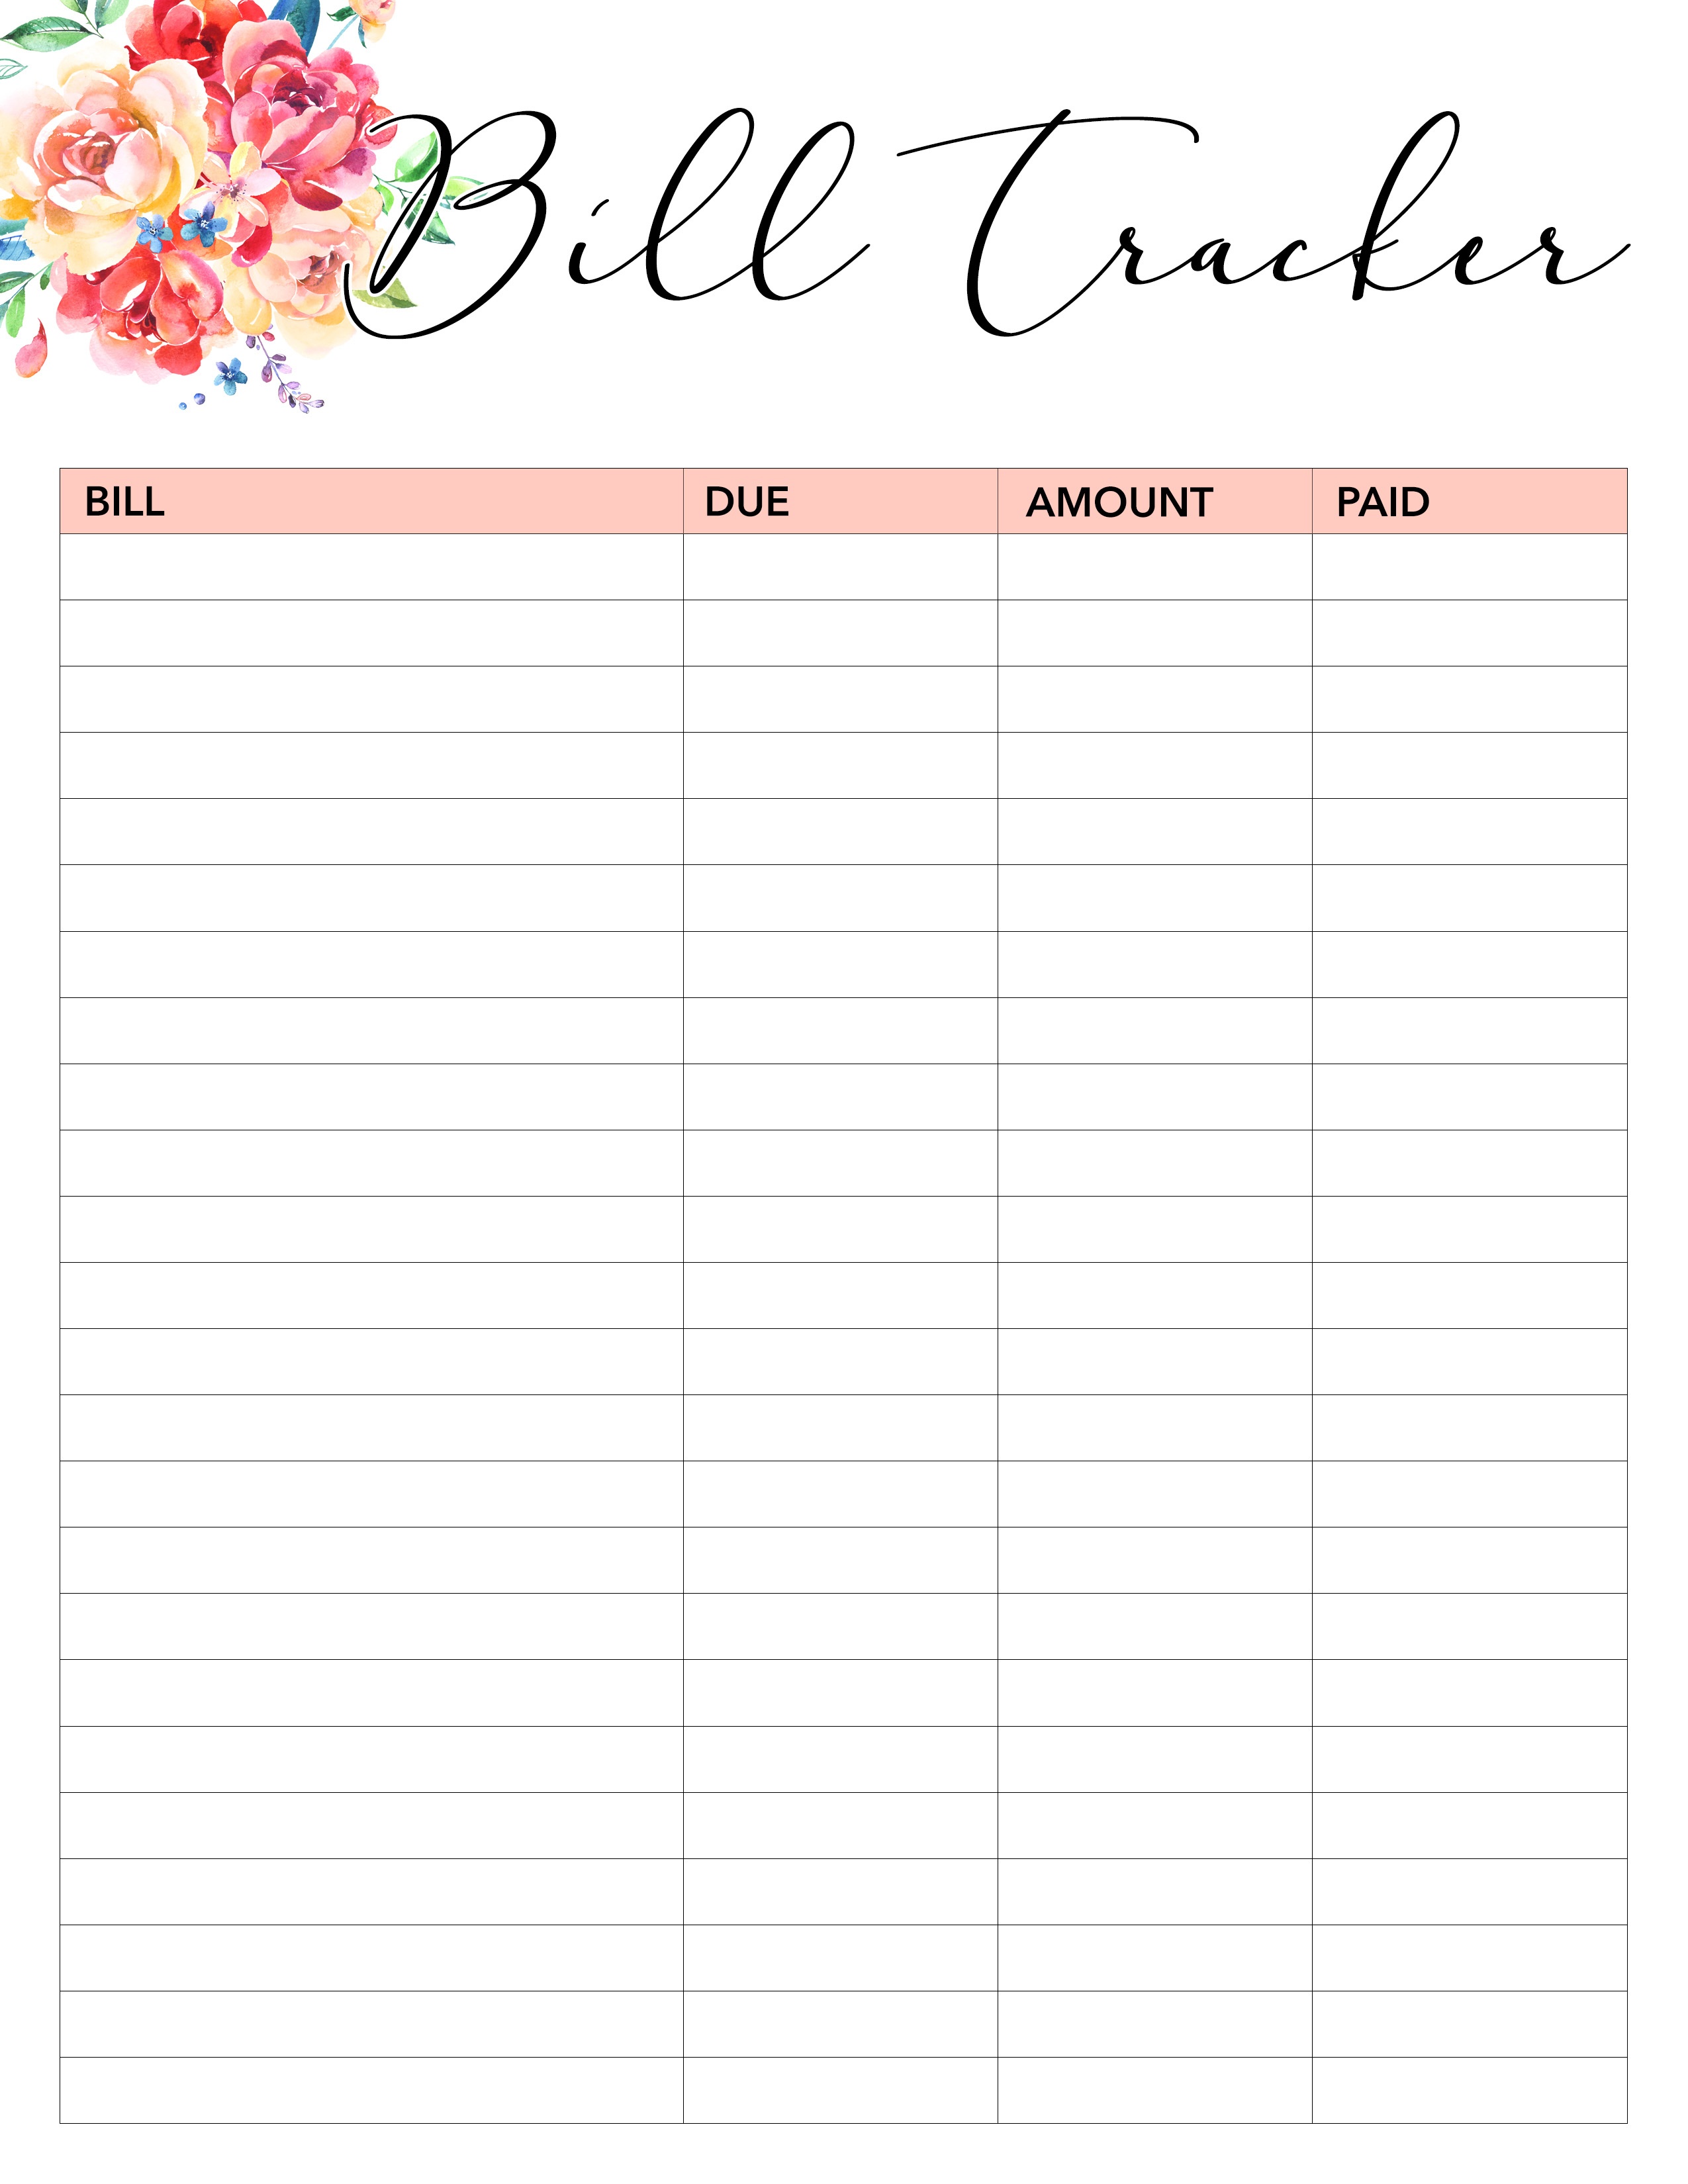 Free Printable Bill Tracker (74+ Images In Collection) Page 1 - Free Printable Bill Tracker